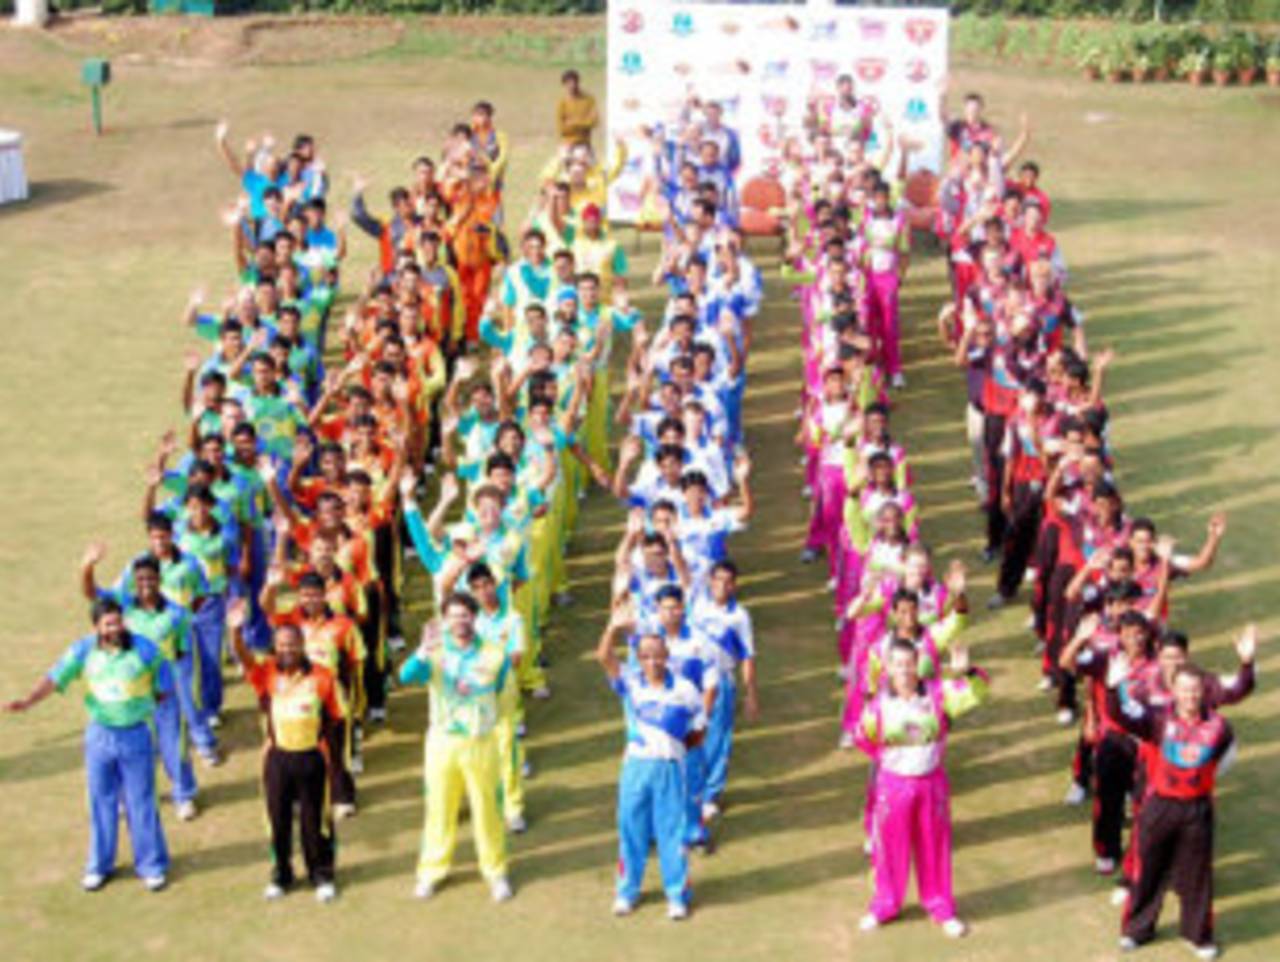 All the participants in the Indian Cricket League (ICL) wave towards the camera, ICL 20-20 Indian Championship, Panchkula, November 30, 2007